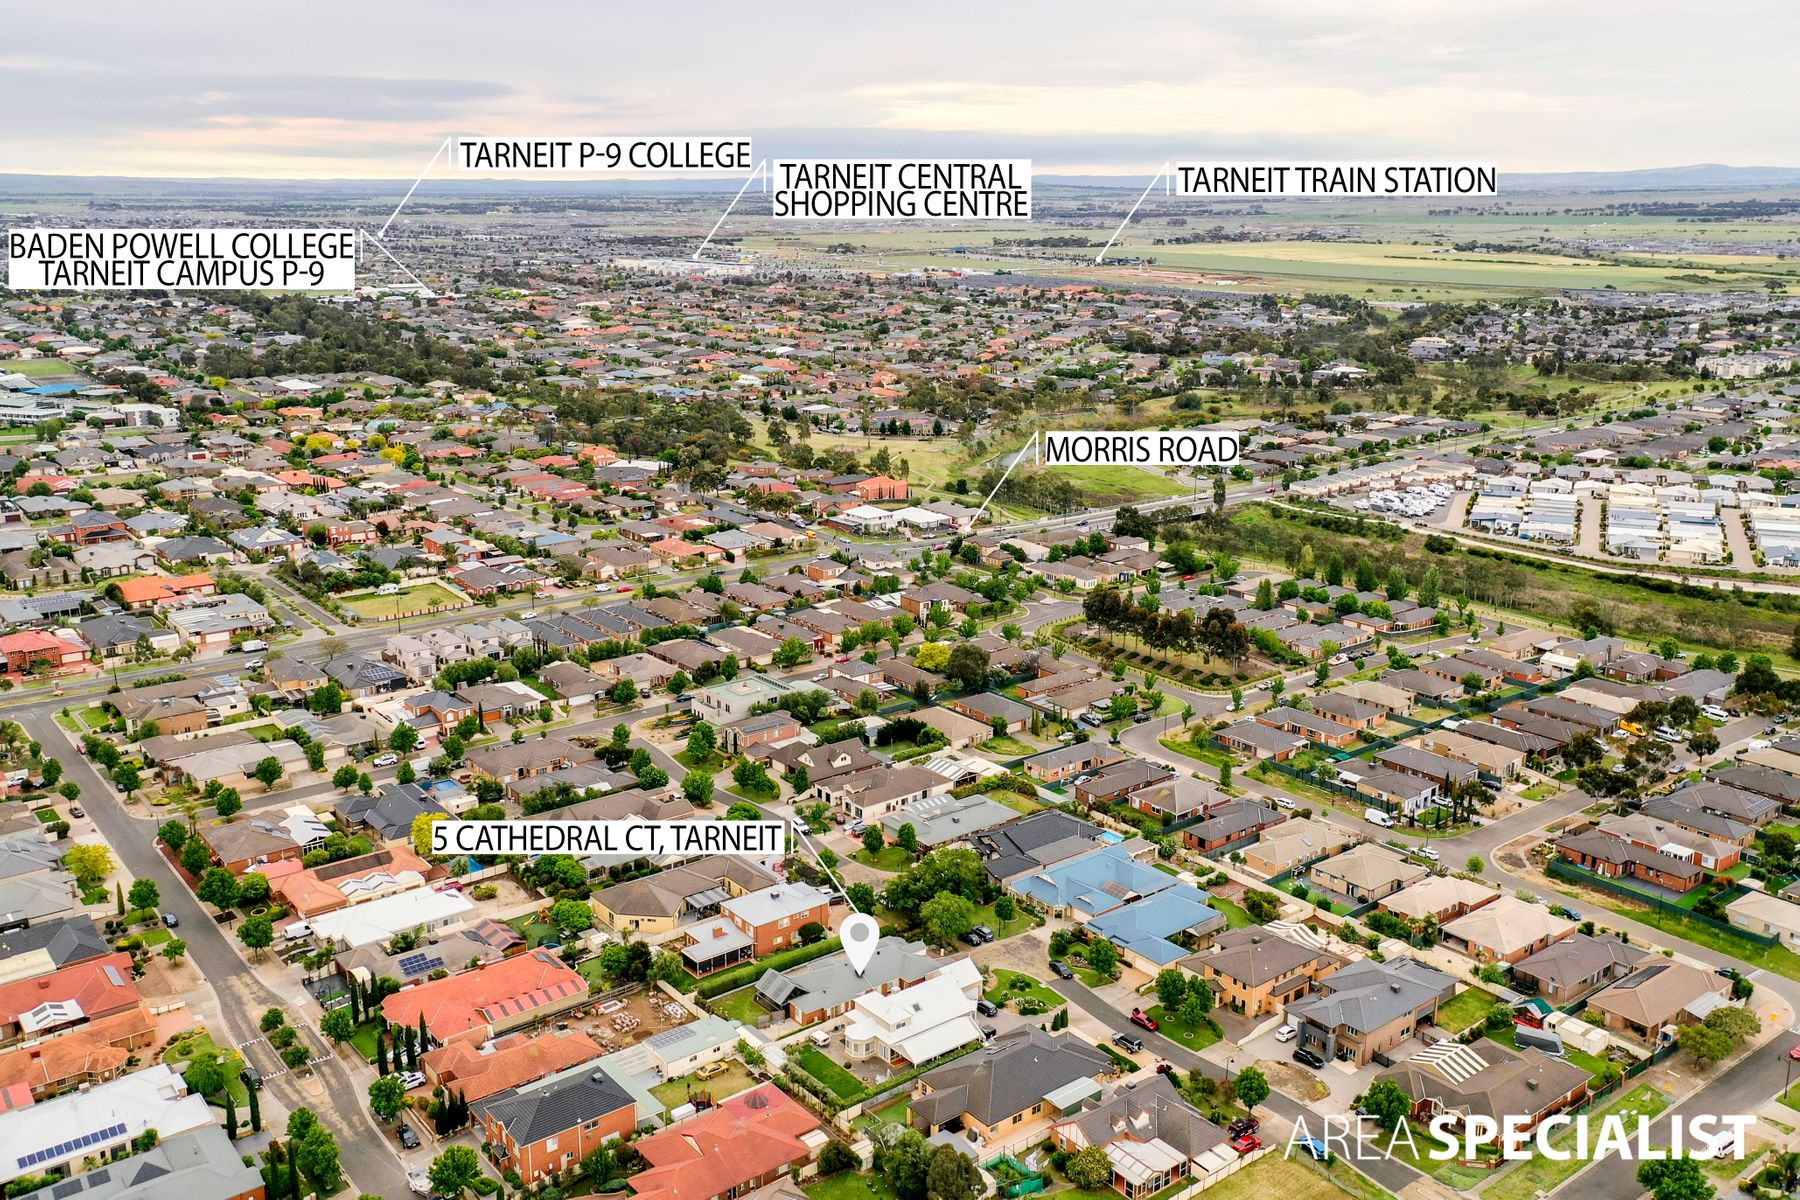 5 Cathedral Ct, Tarneit 0613